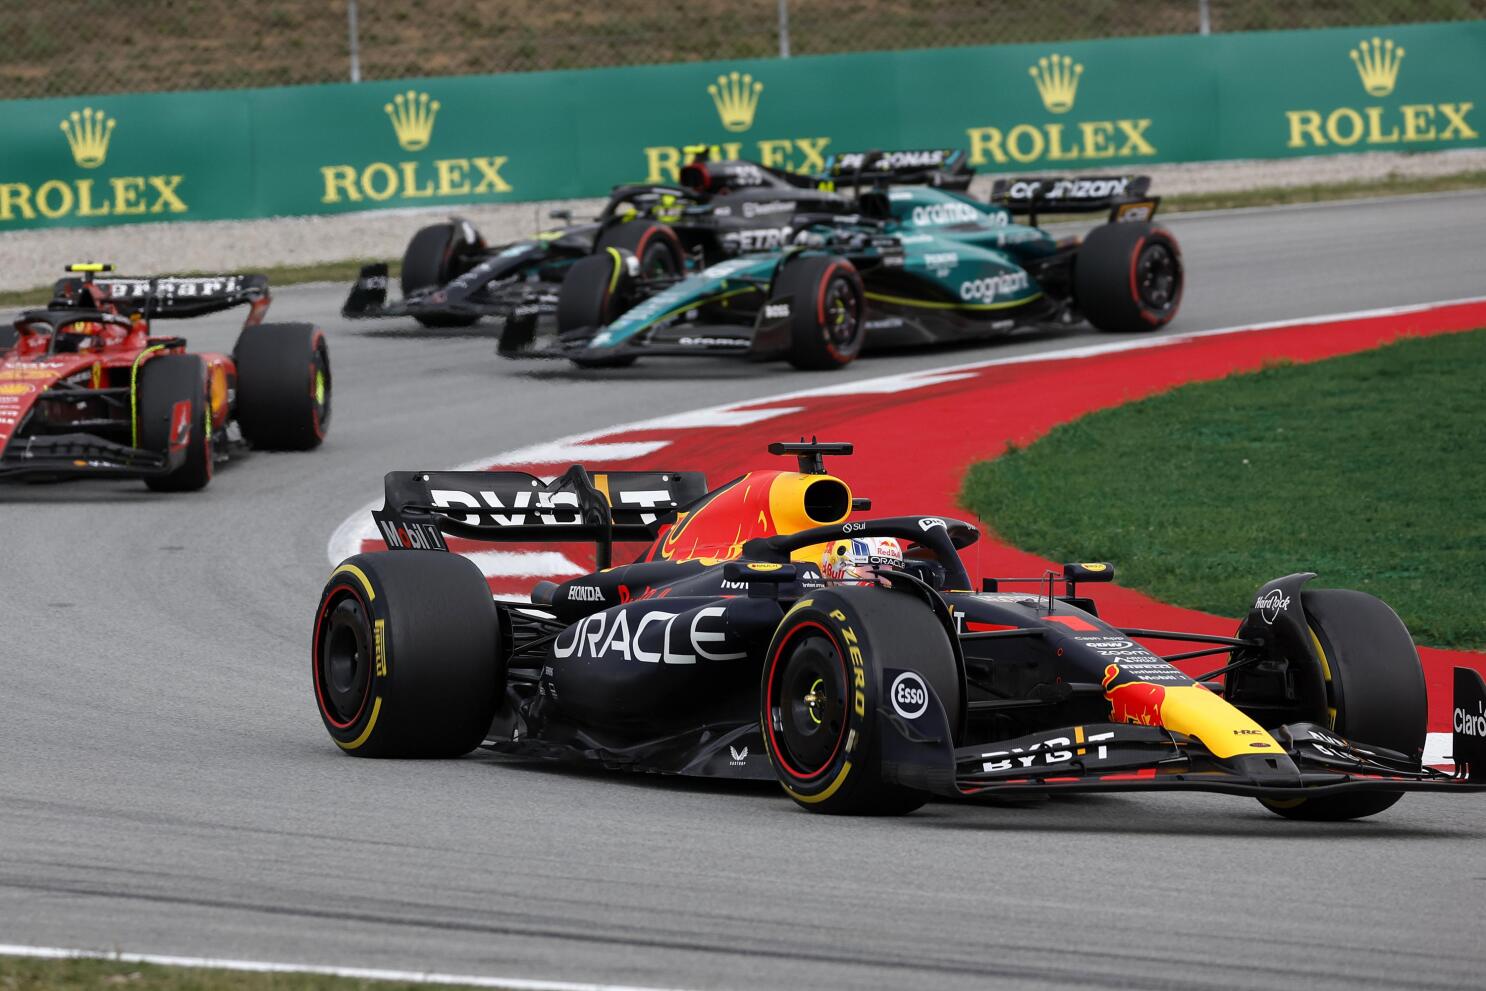 Spanish GP: Max Verstappen says it's 'very unlikely' Red Bull will